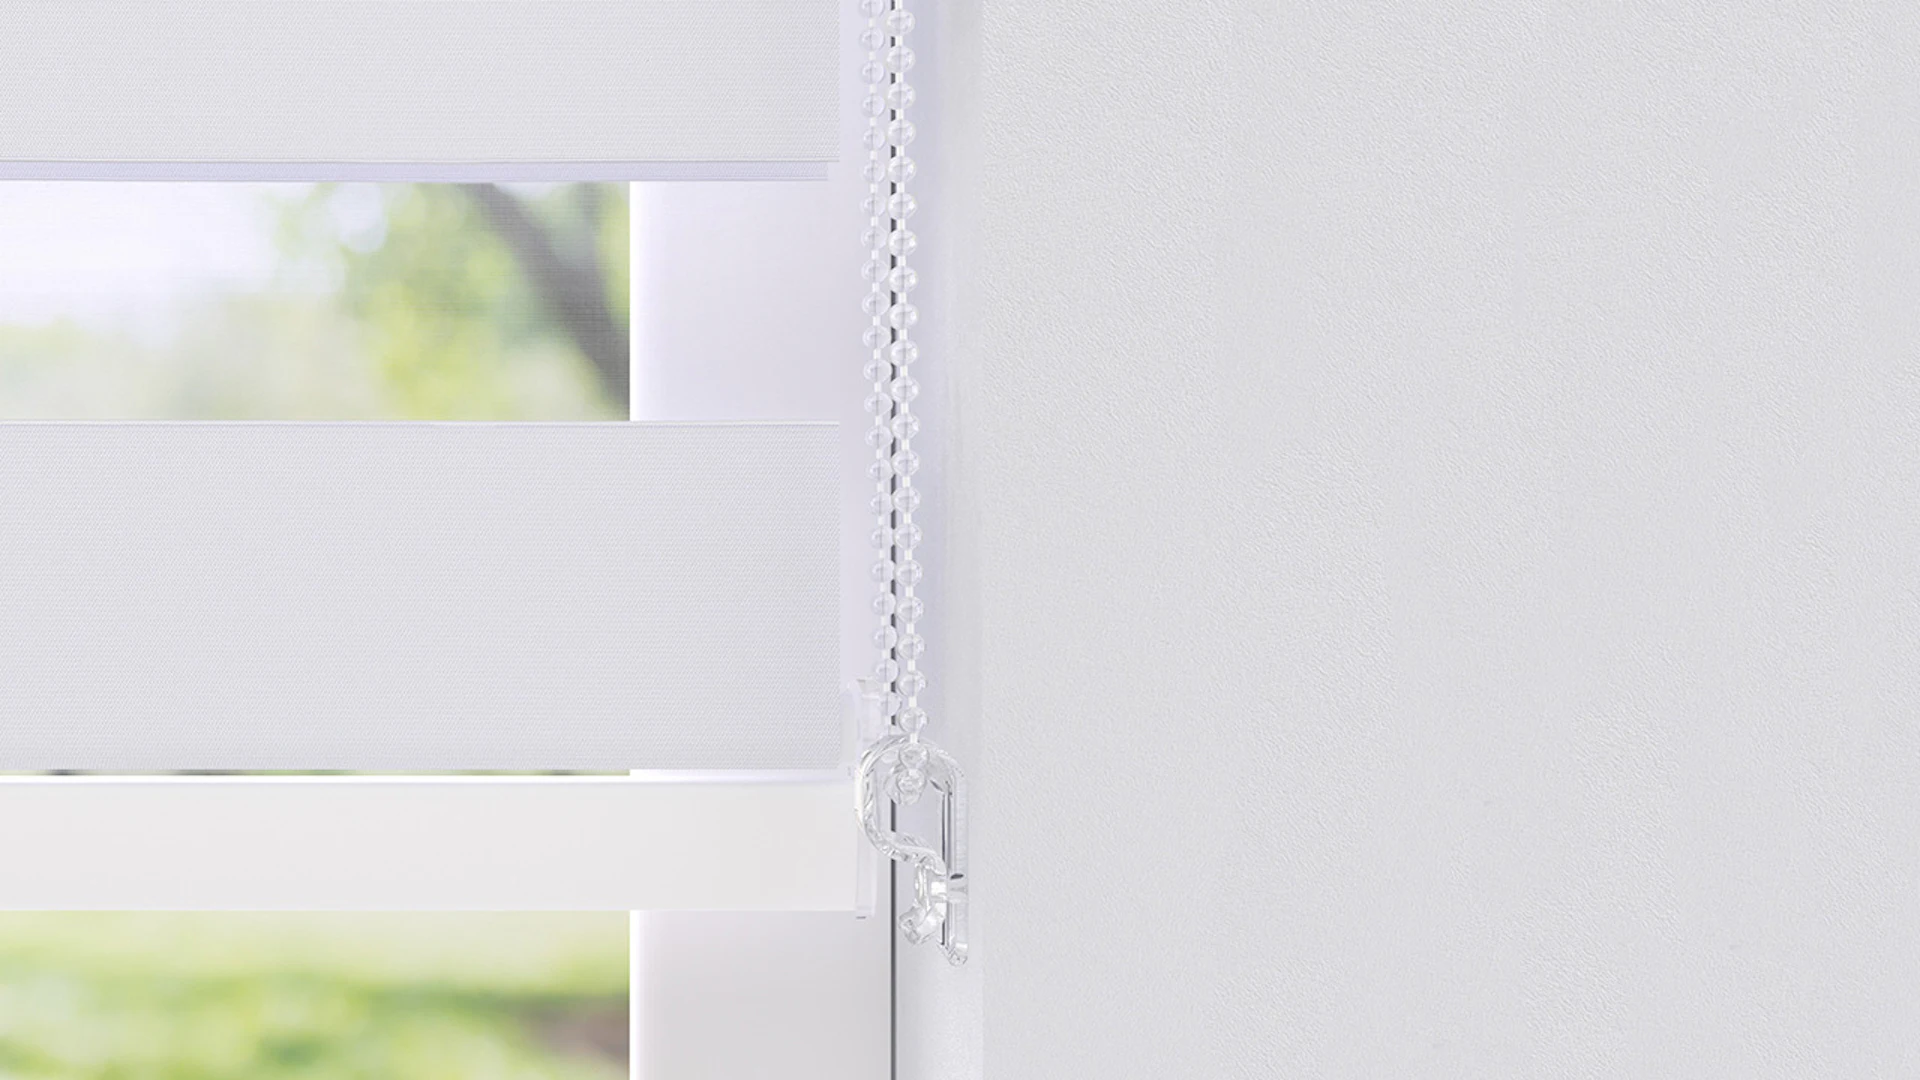 planeo double roller blind 28mm VD head profile - white 70 x 175 cm